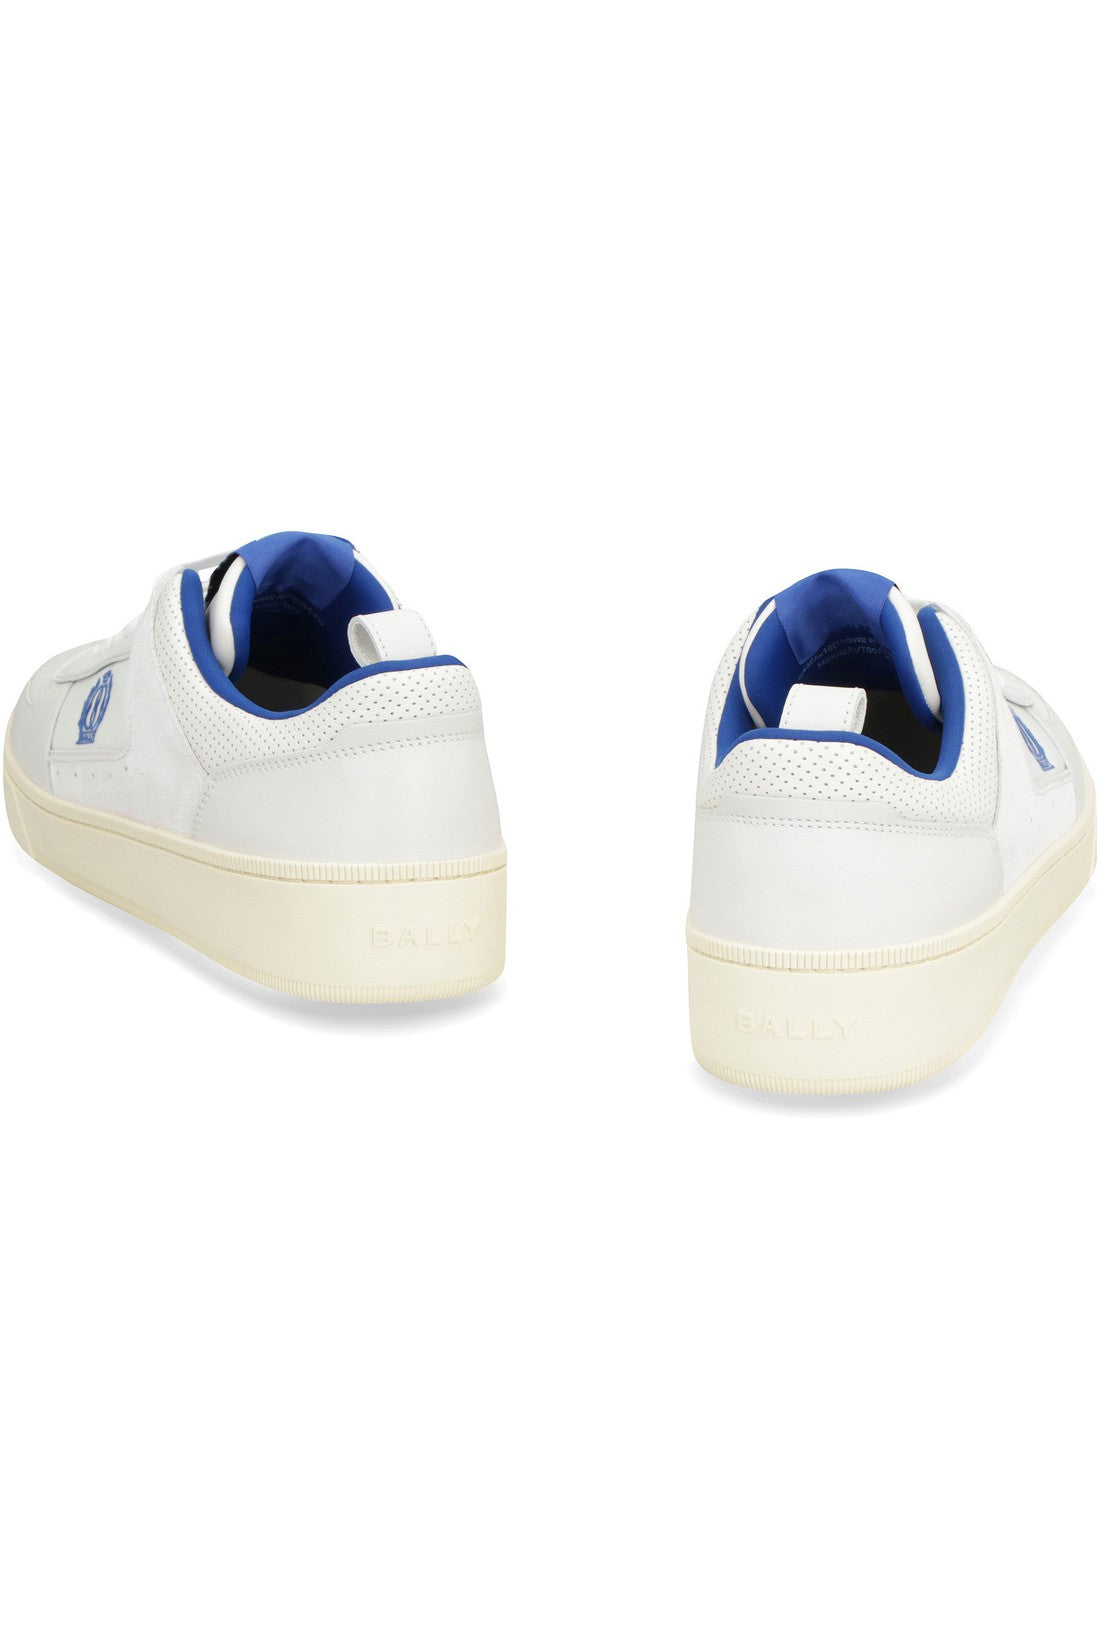 Bally-OUTLET-SALE-Riweira leather low-top sneakers-ARCHIVIST